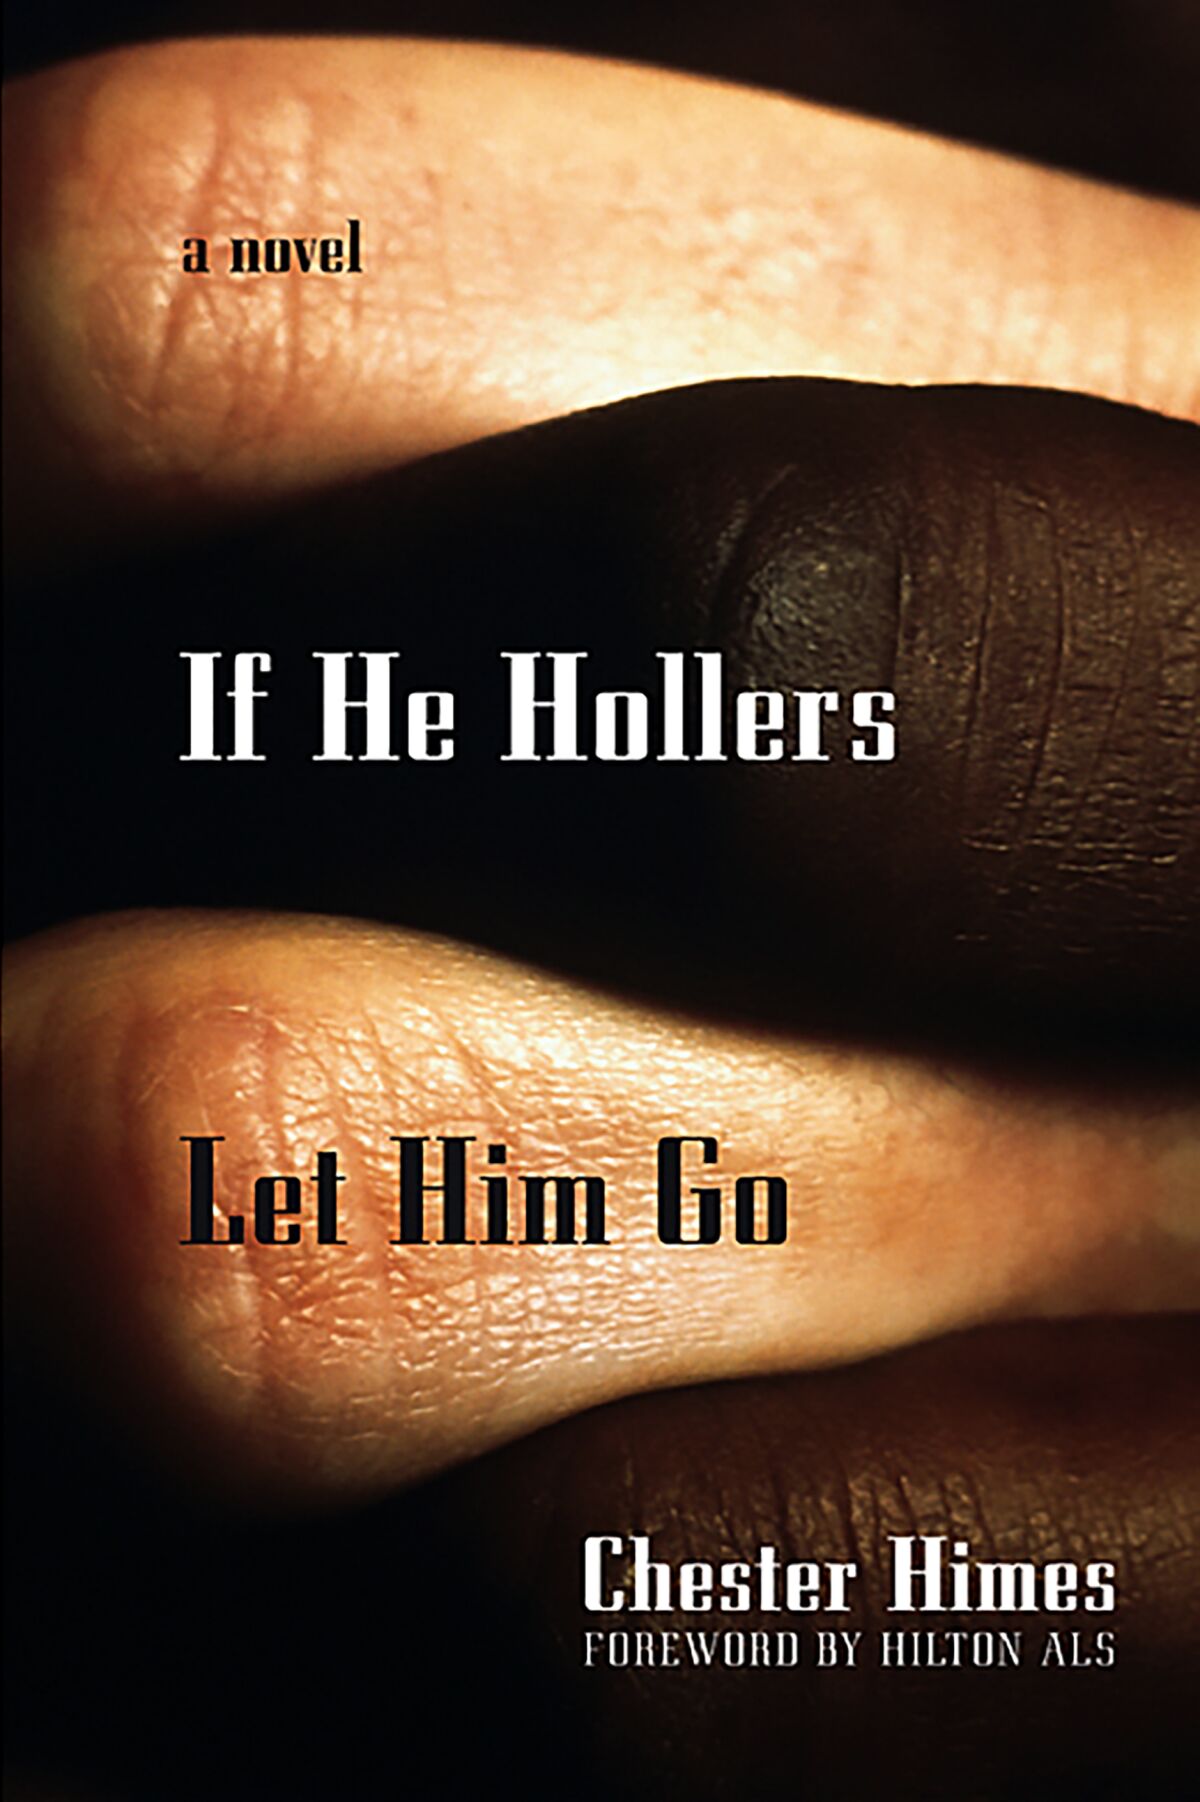 "If He Hollers Let Him Go" by Chester Himes